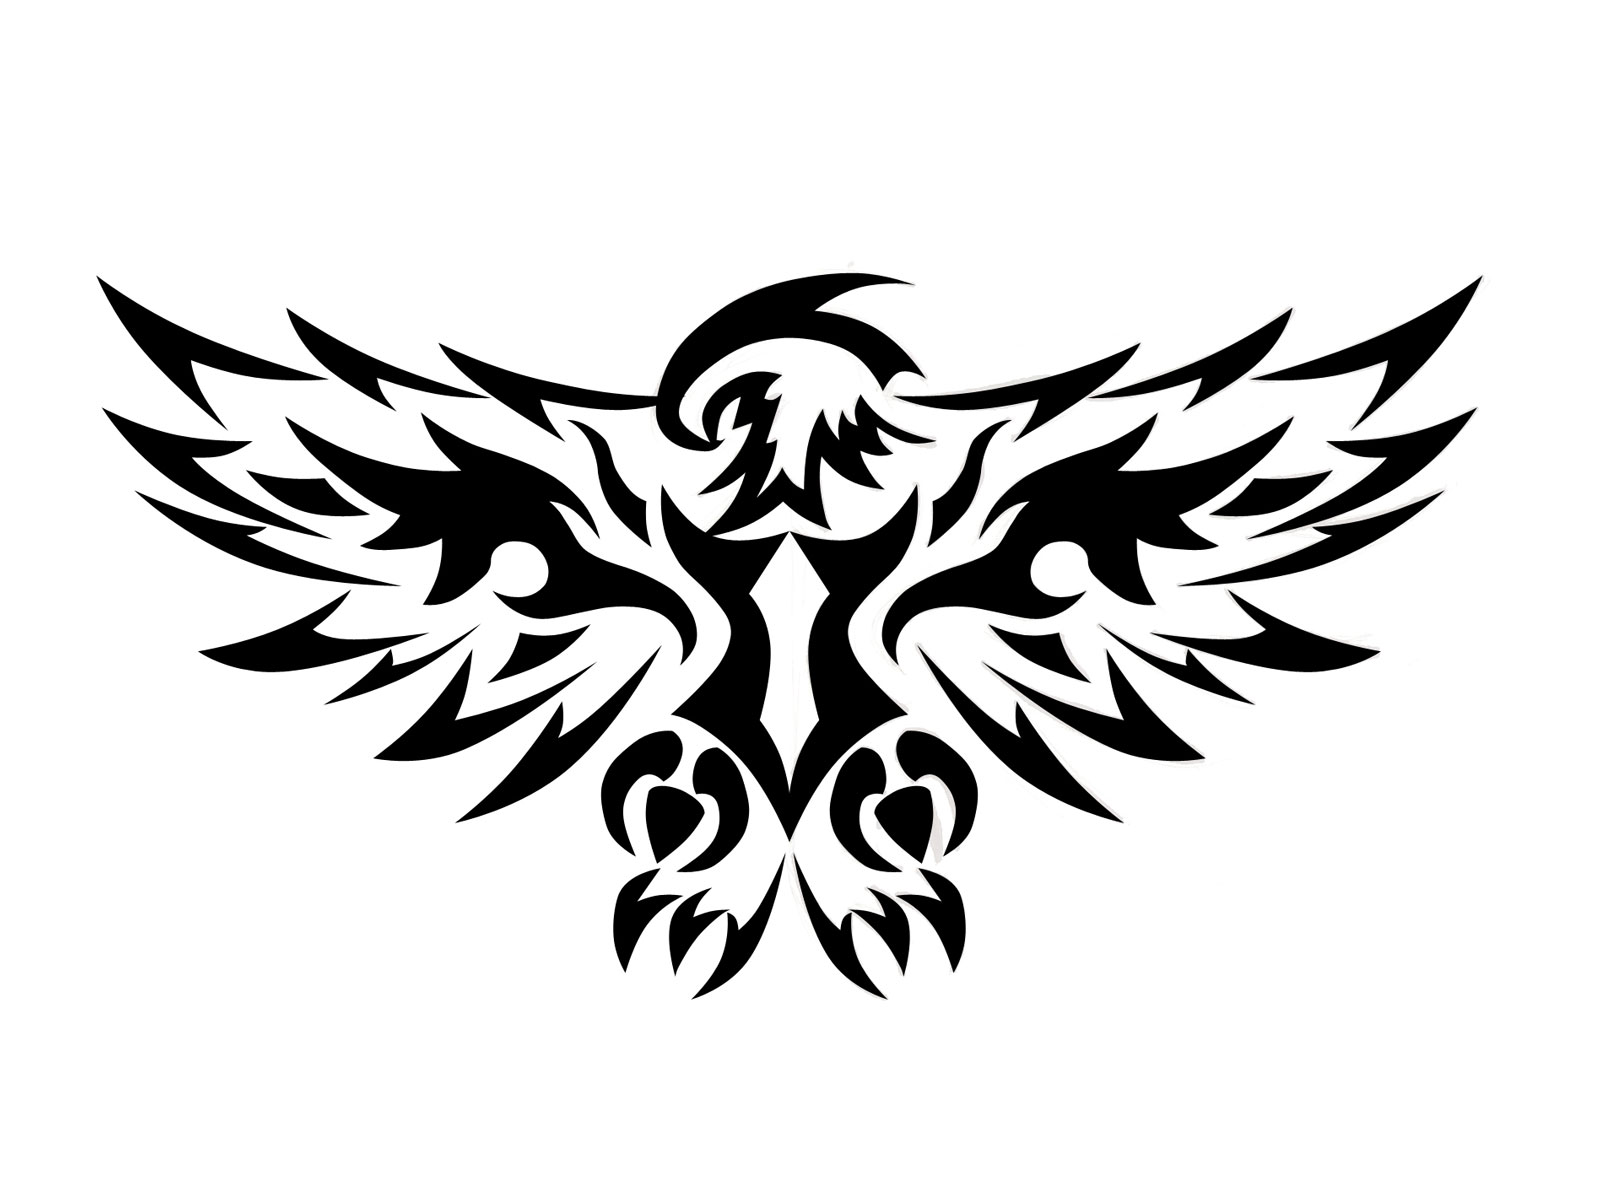 Tribal wings tattoo design-968 : Image Gallery 304 | Amazing ...